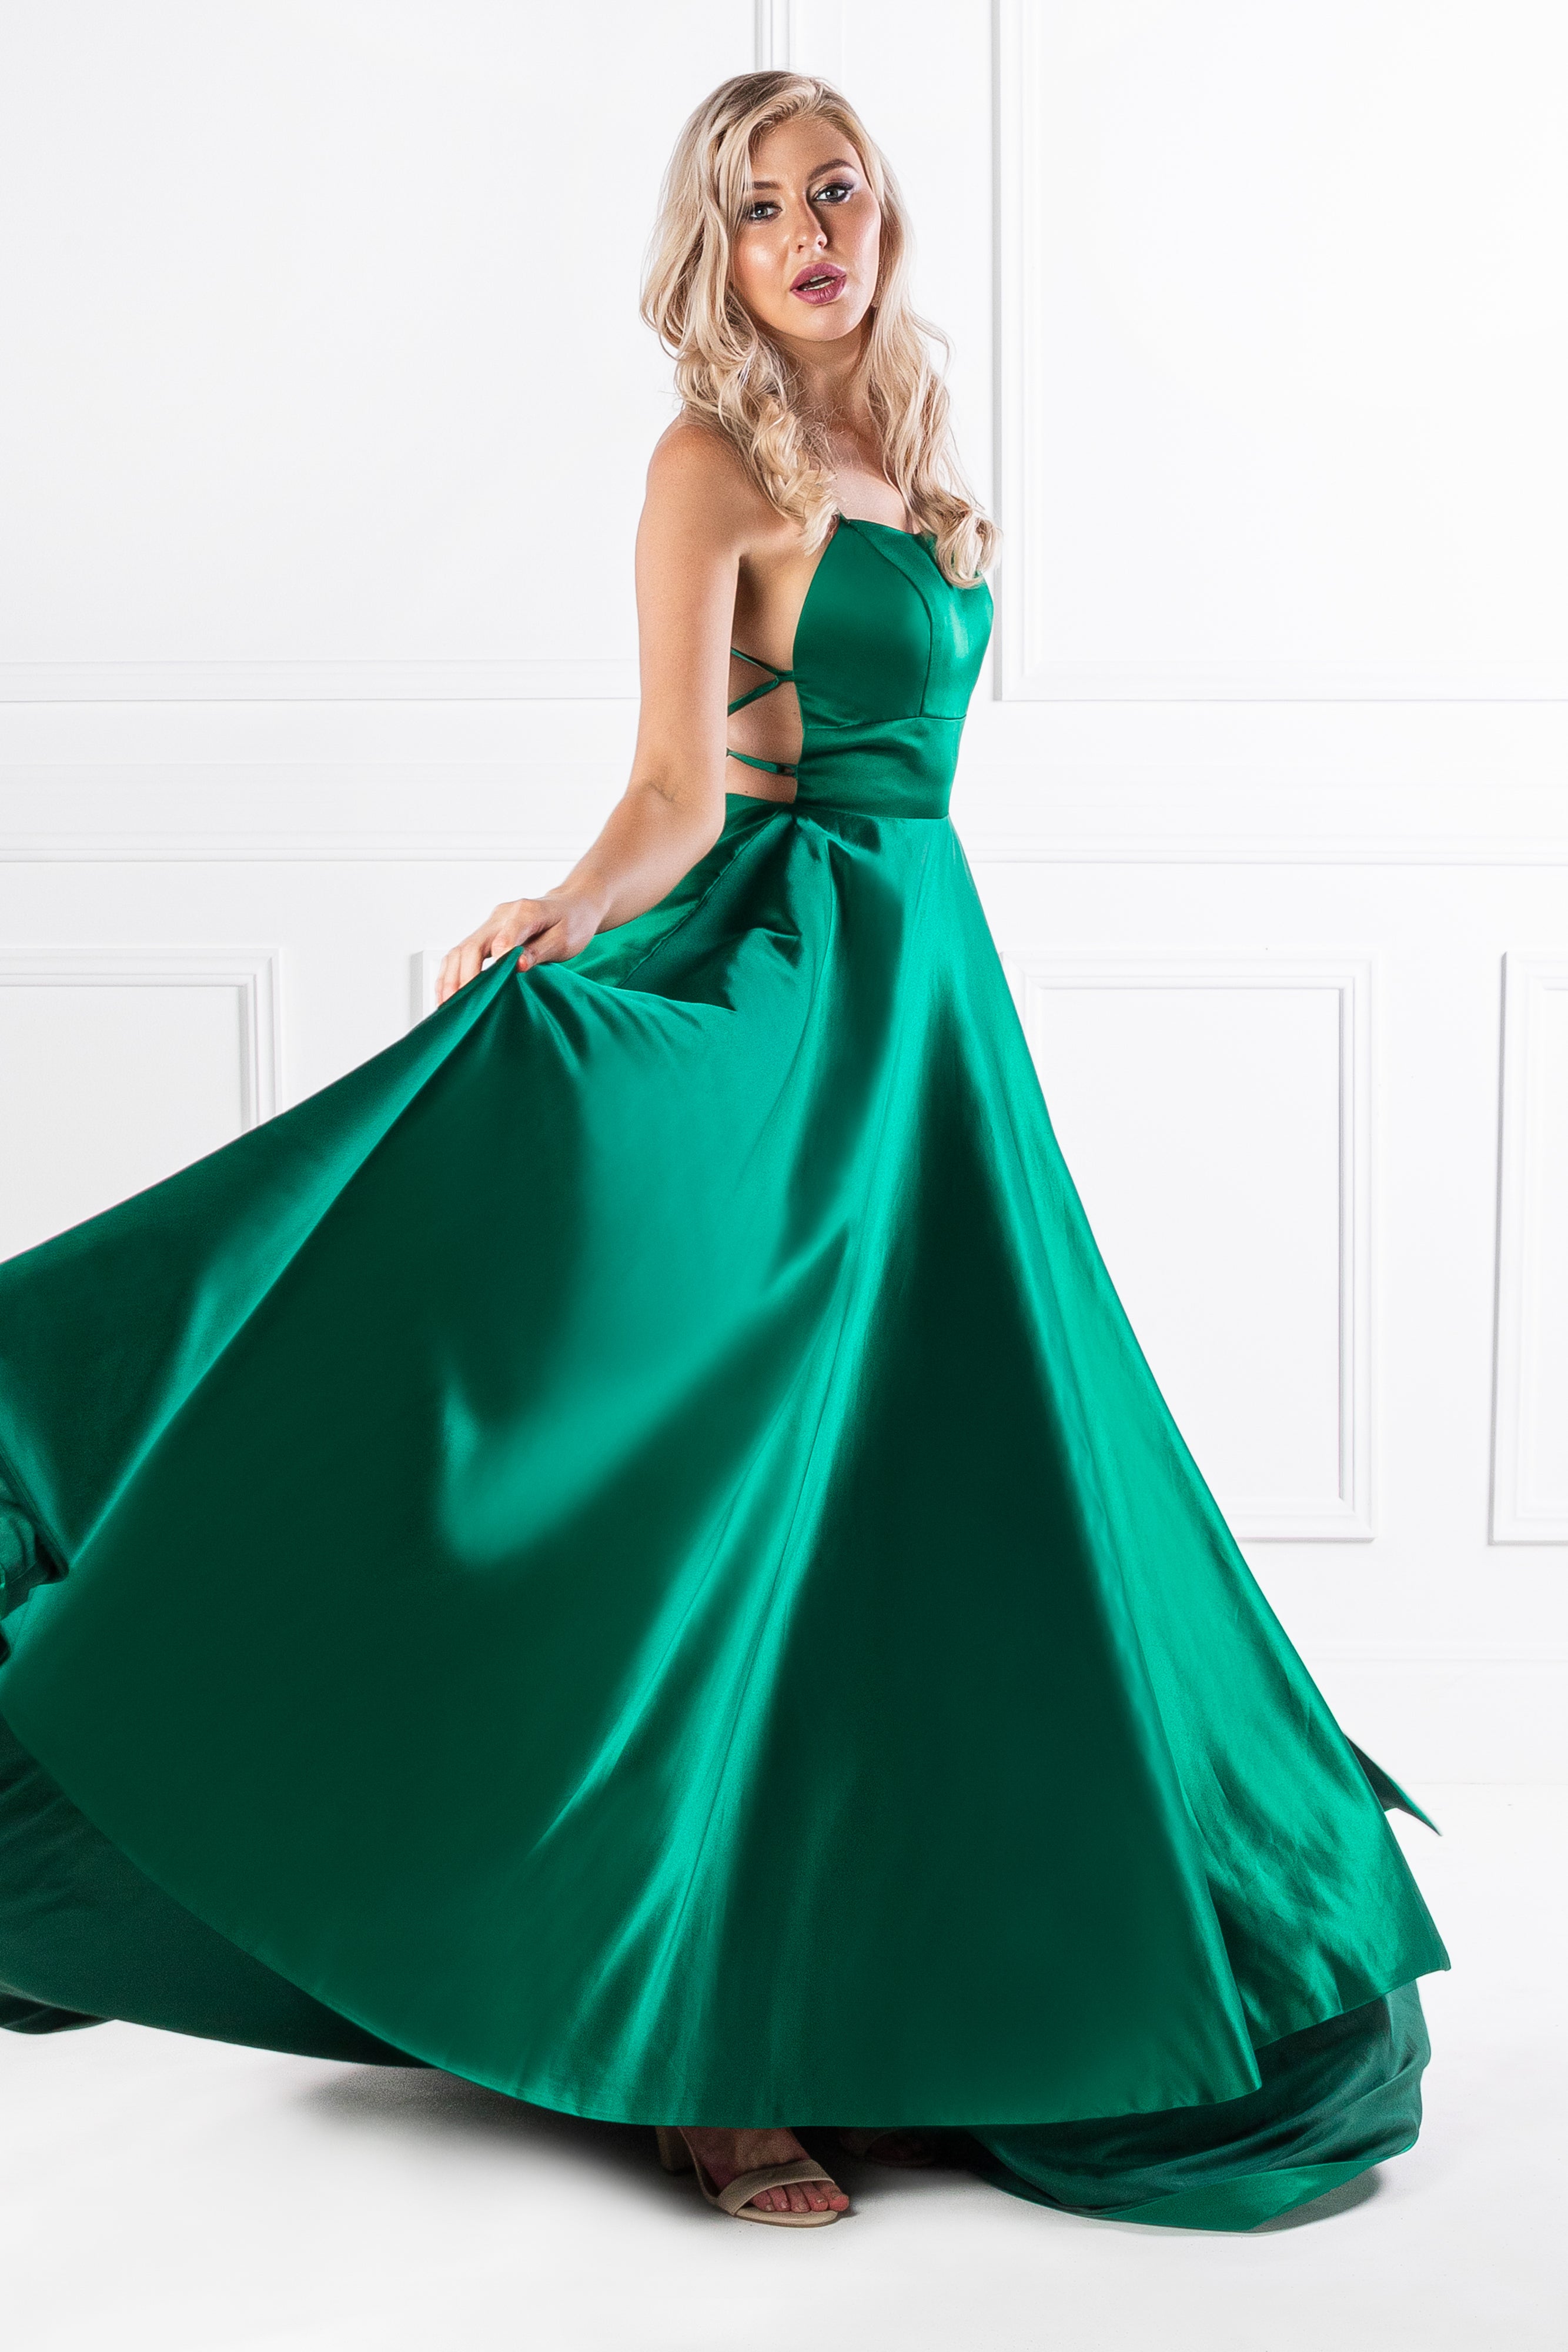 SHERRI Emerald Green Lace Up Back Satin Formal Gown {vendor} AfterPay Humm ZipPay LayBuy Sezzle